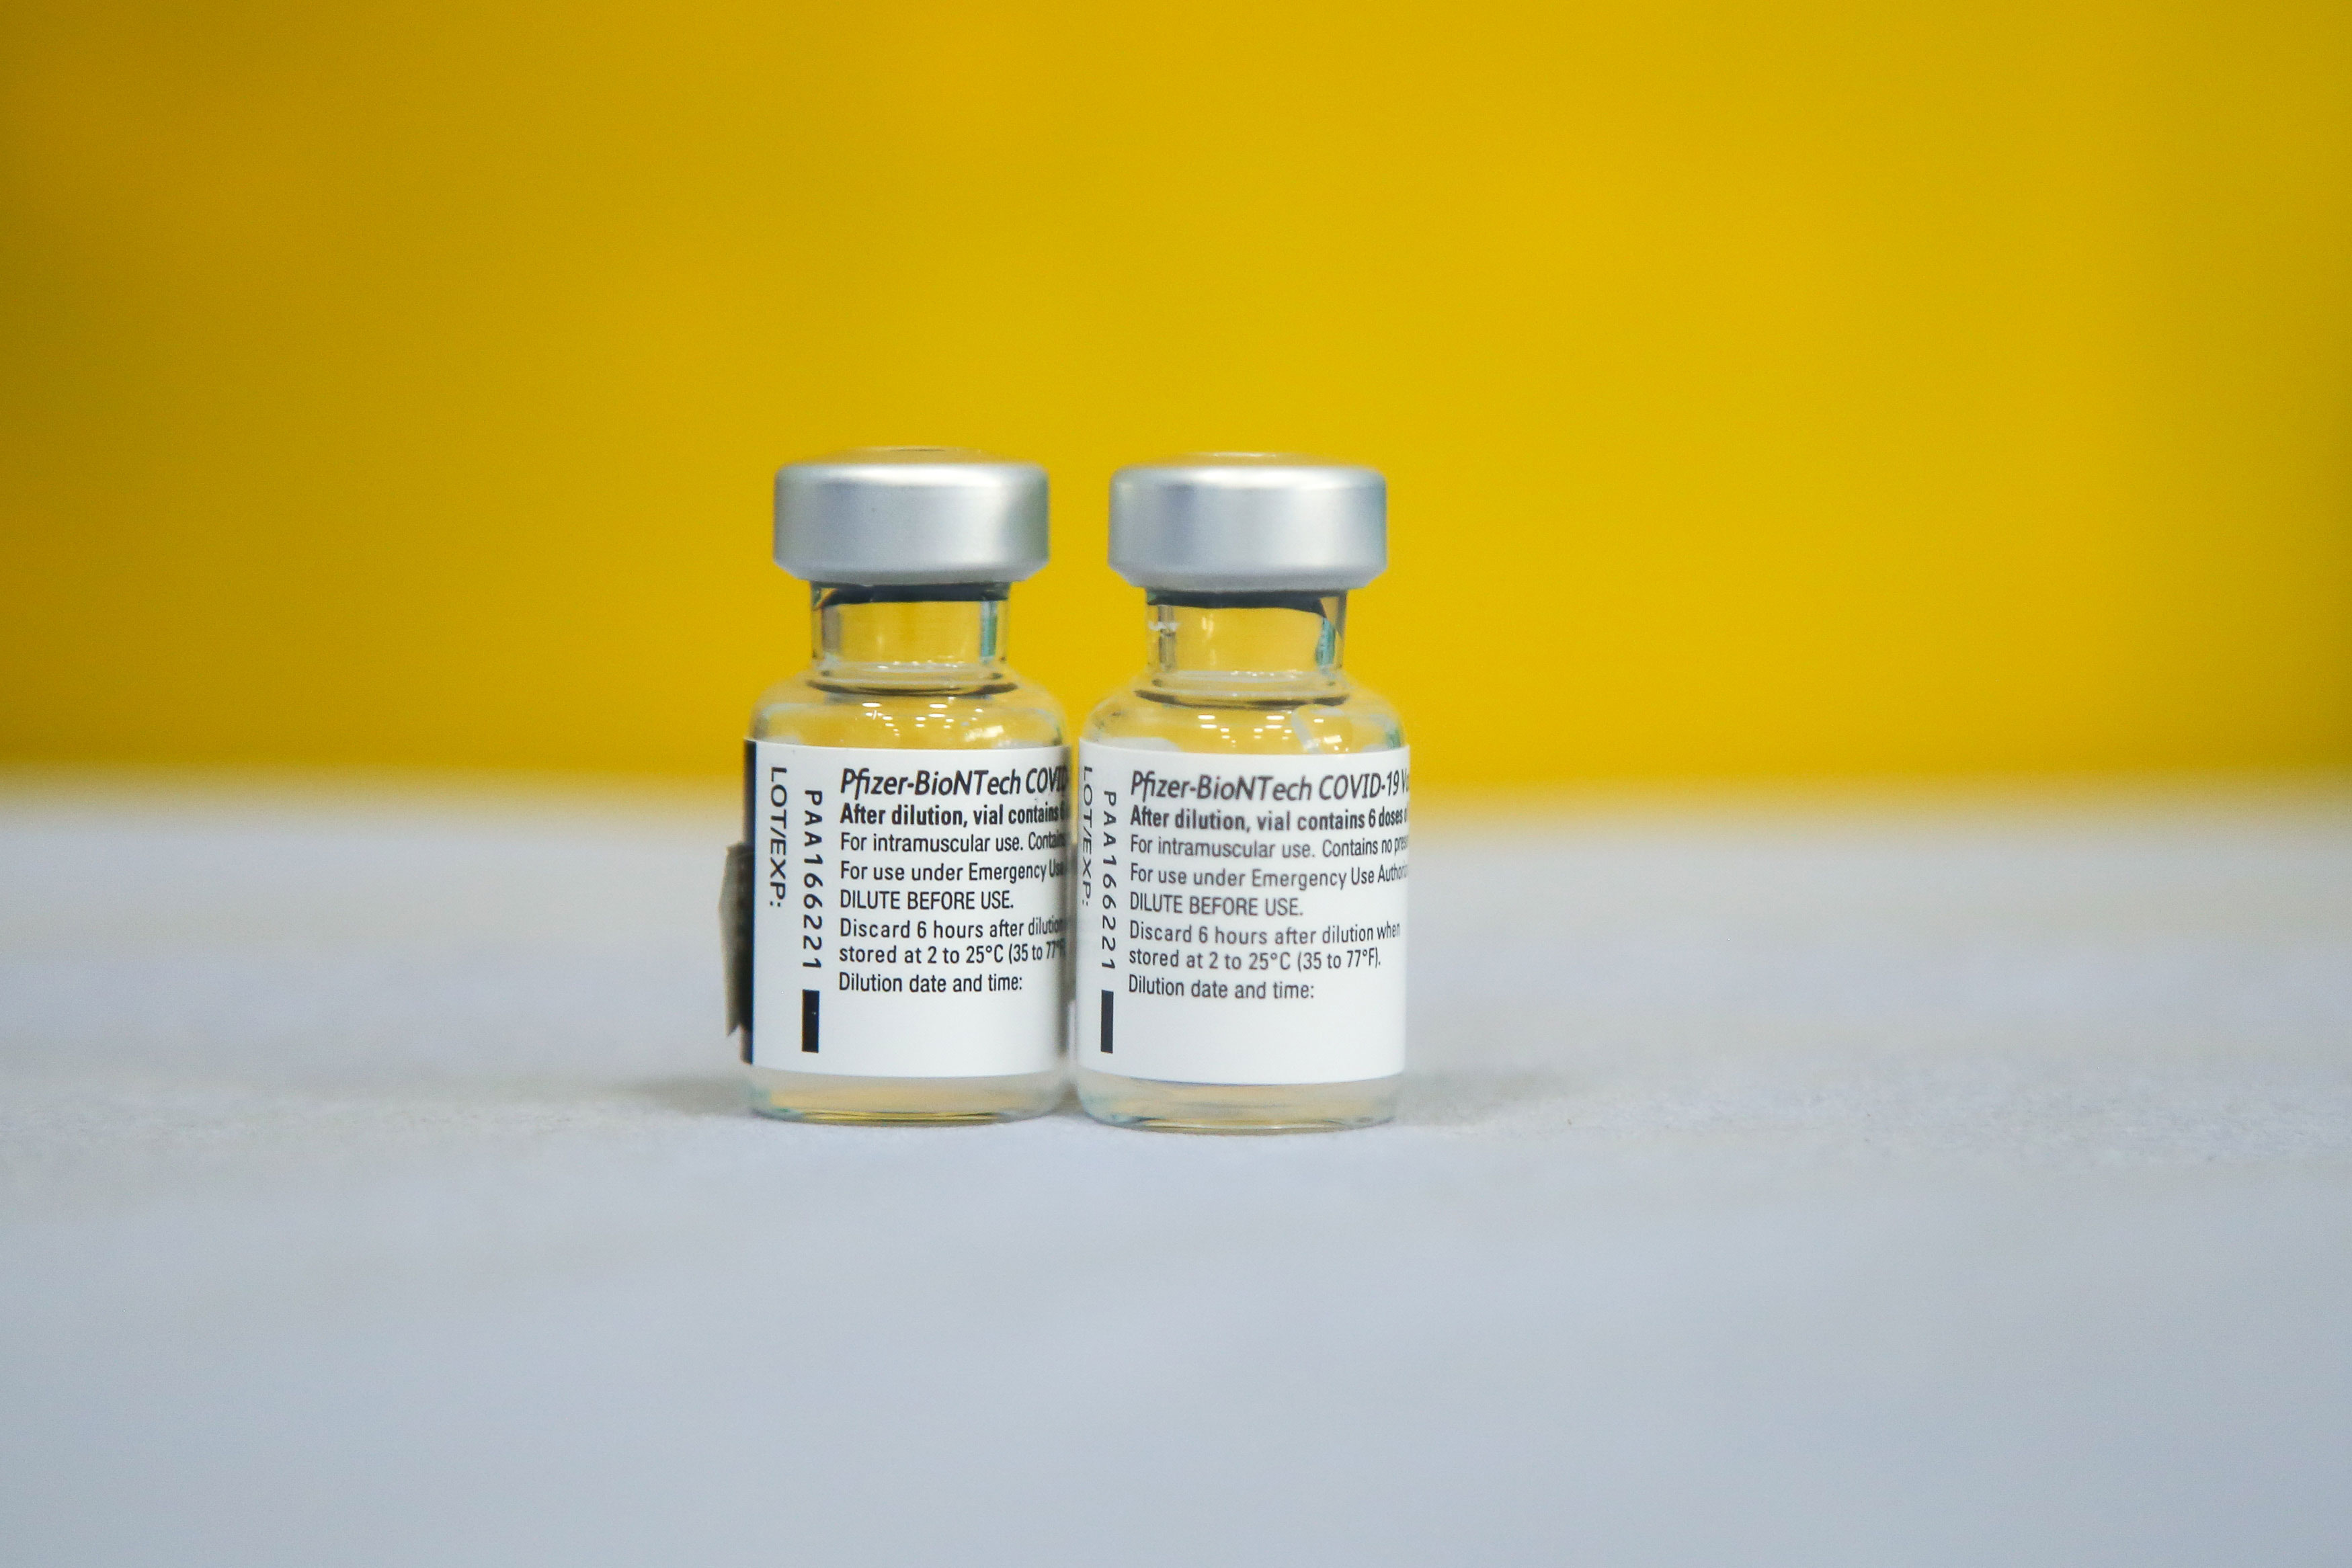 Vials containing the Pfizer-BioNTech Covid-19 vaccine are pictured in London on June 14, 2021.